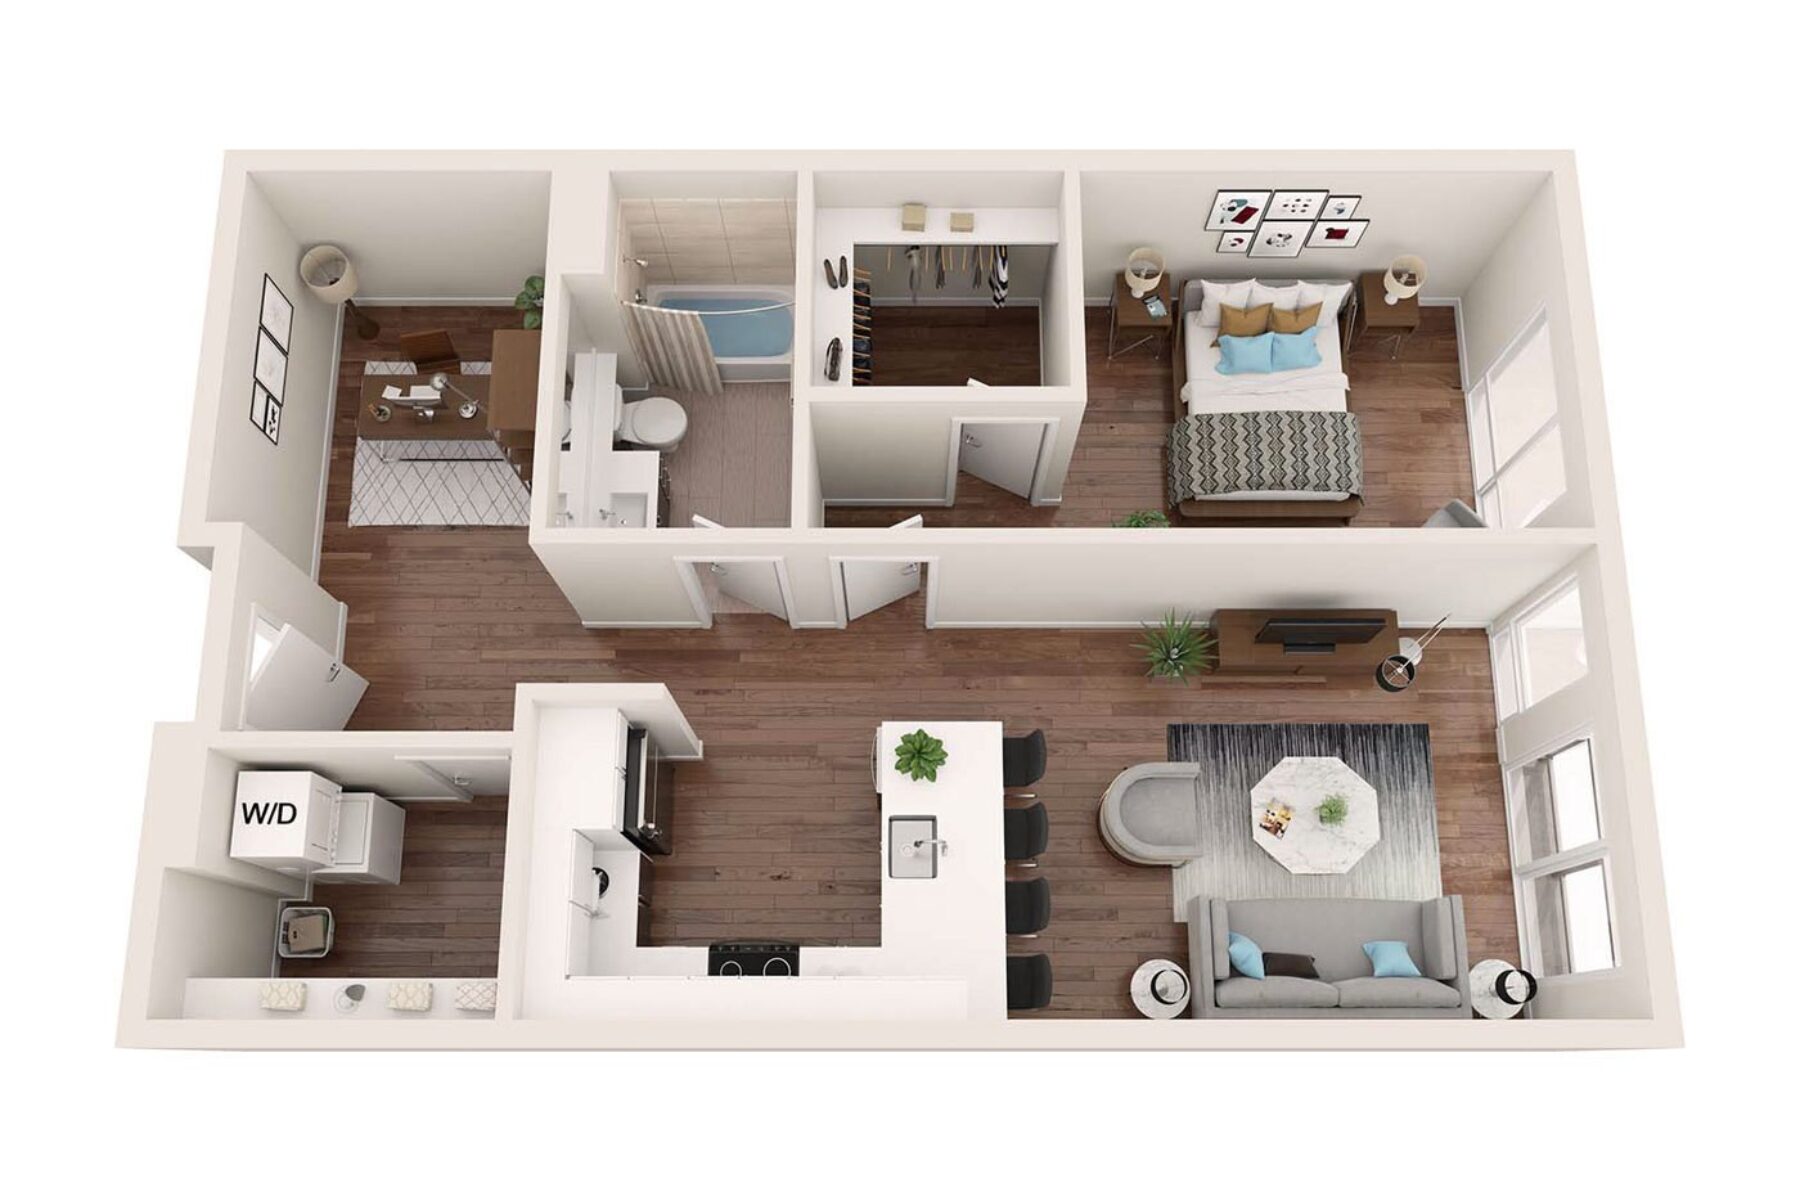 Plan Image: 1D.1 - One Bedroom w/ Den and Balcony